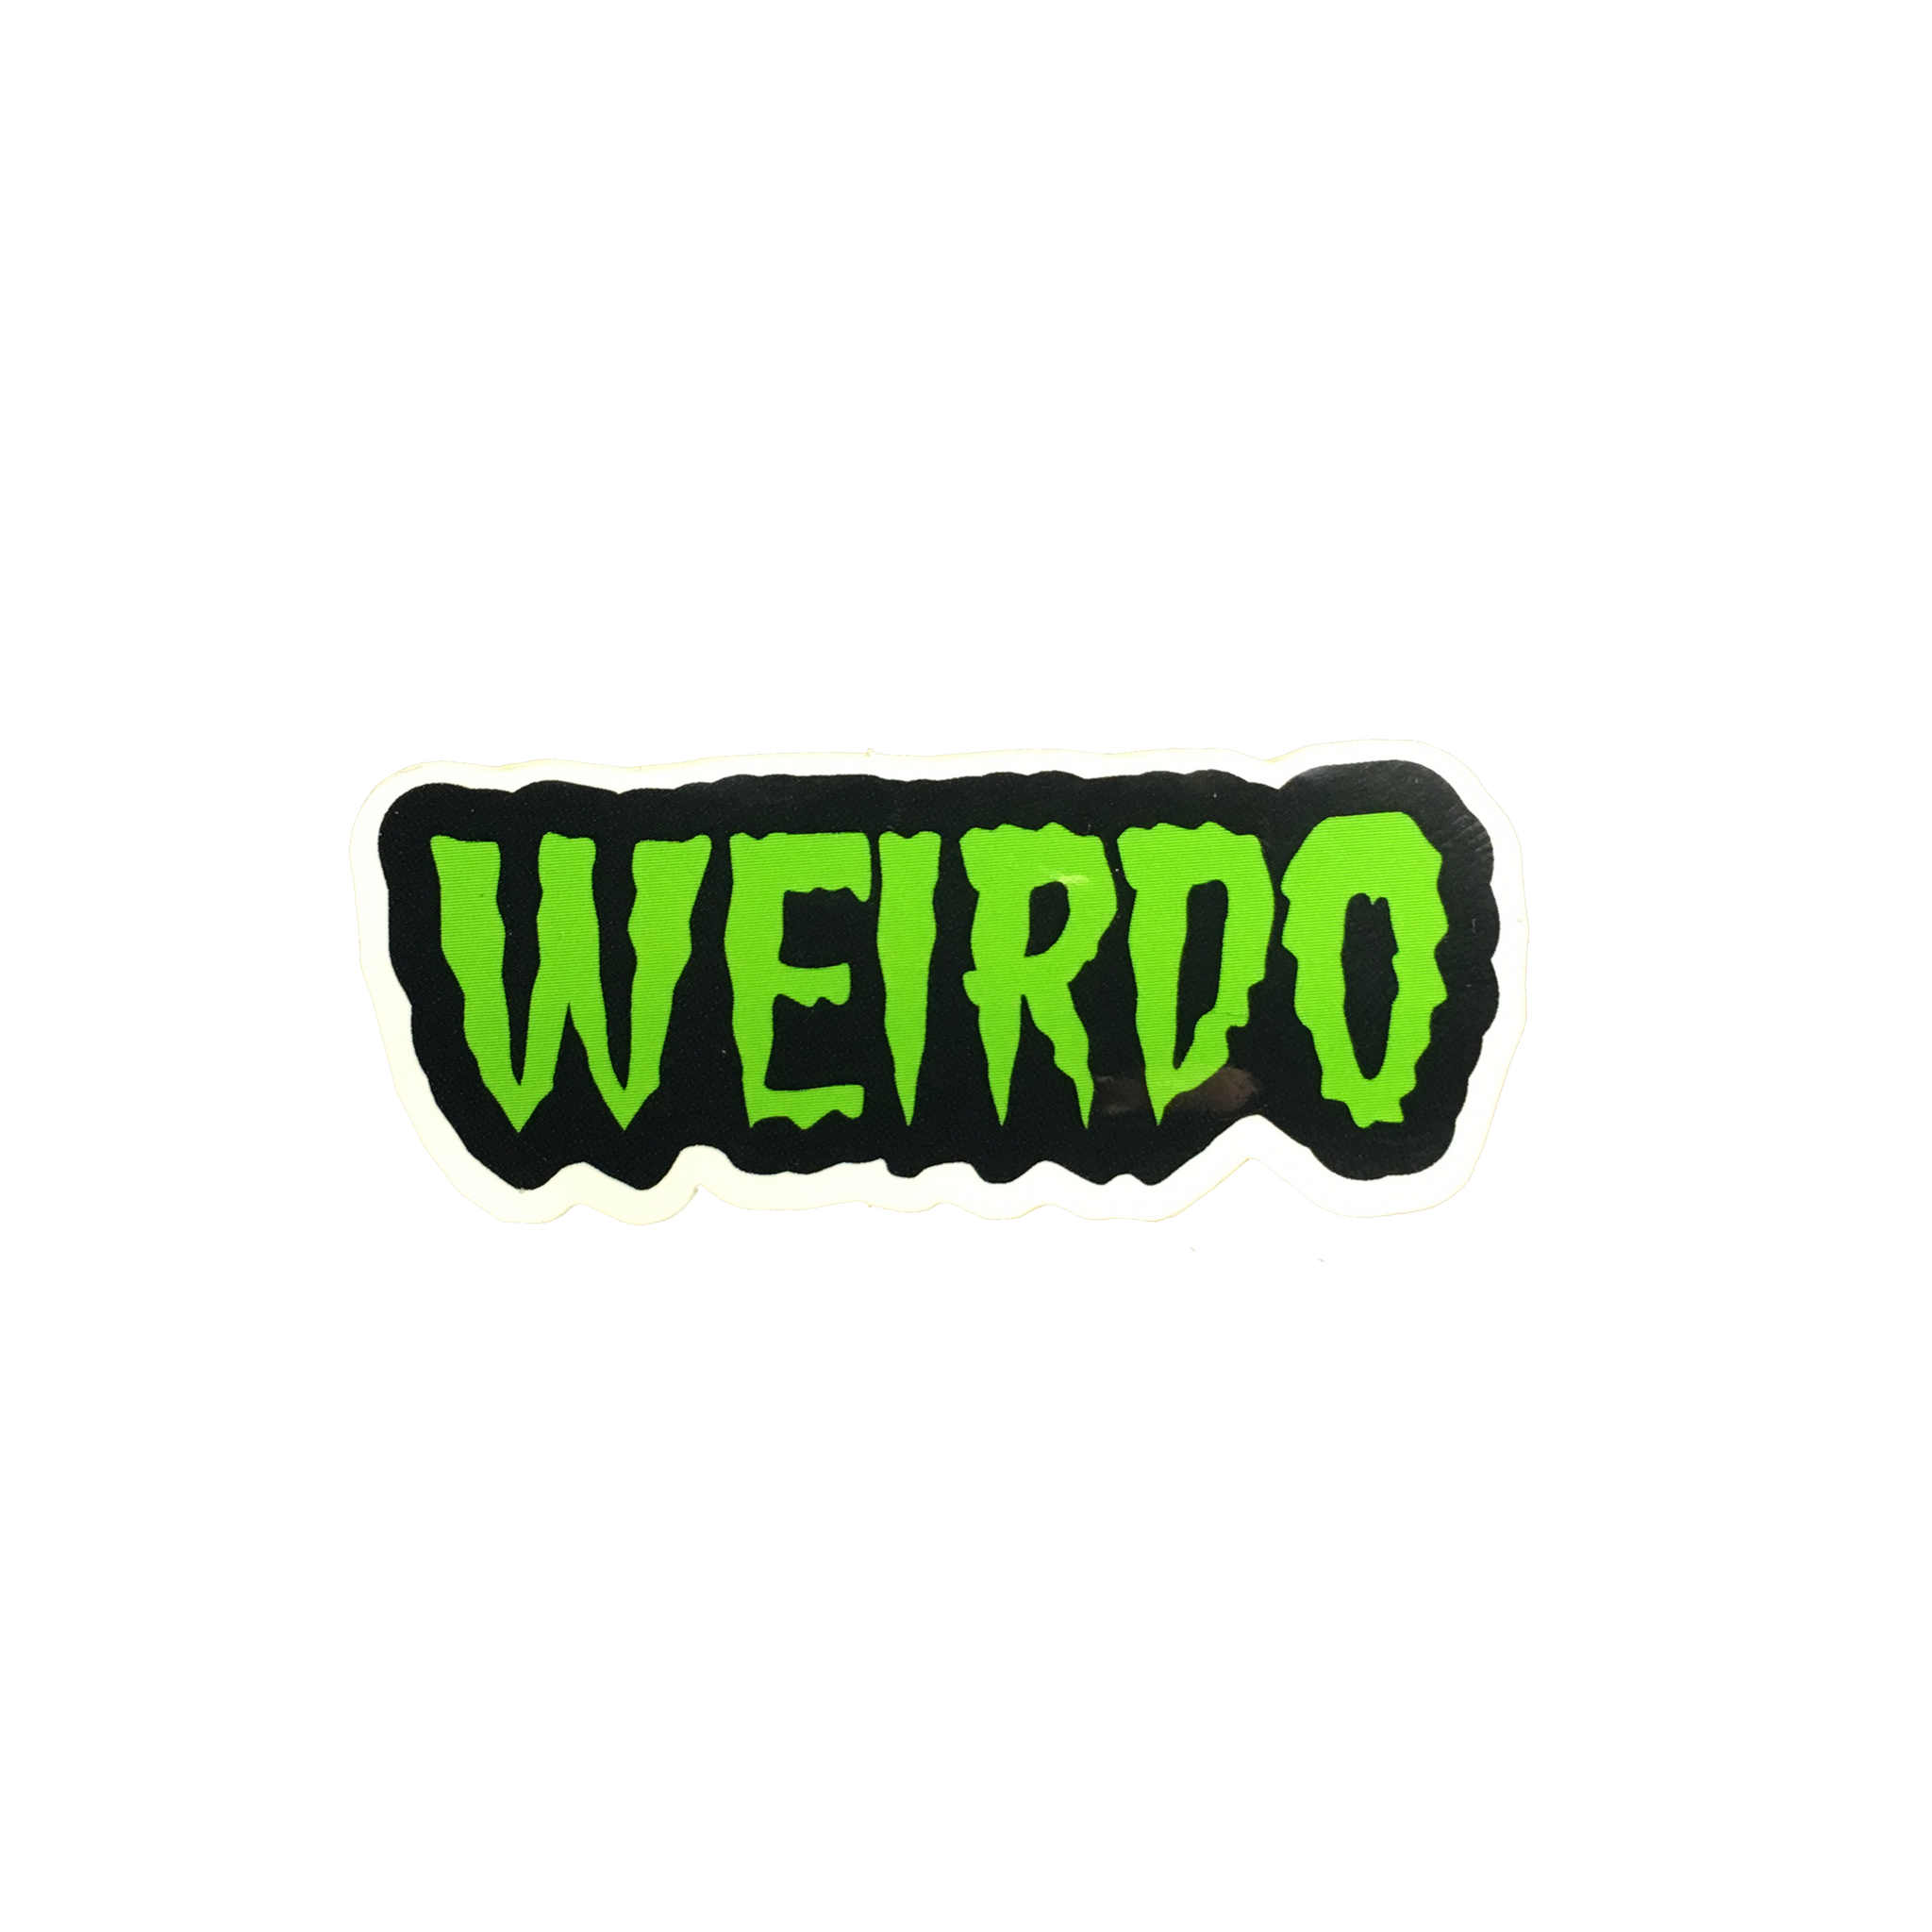 A sticker of the word “WEIRDO” in bright green retro horror movie poster font on a black background with white border